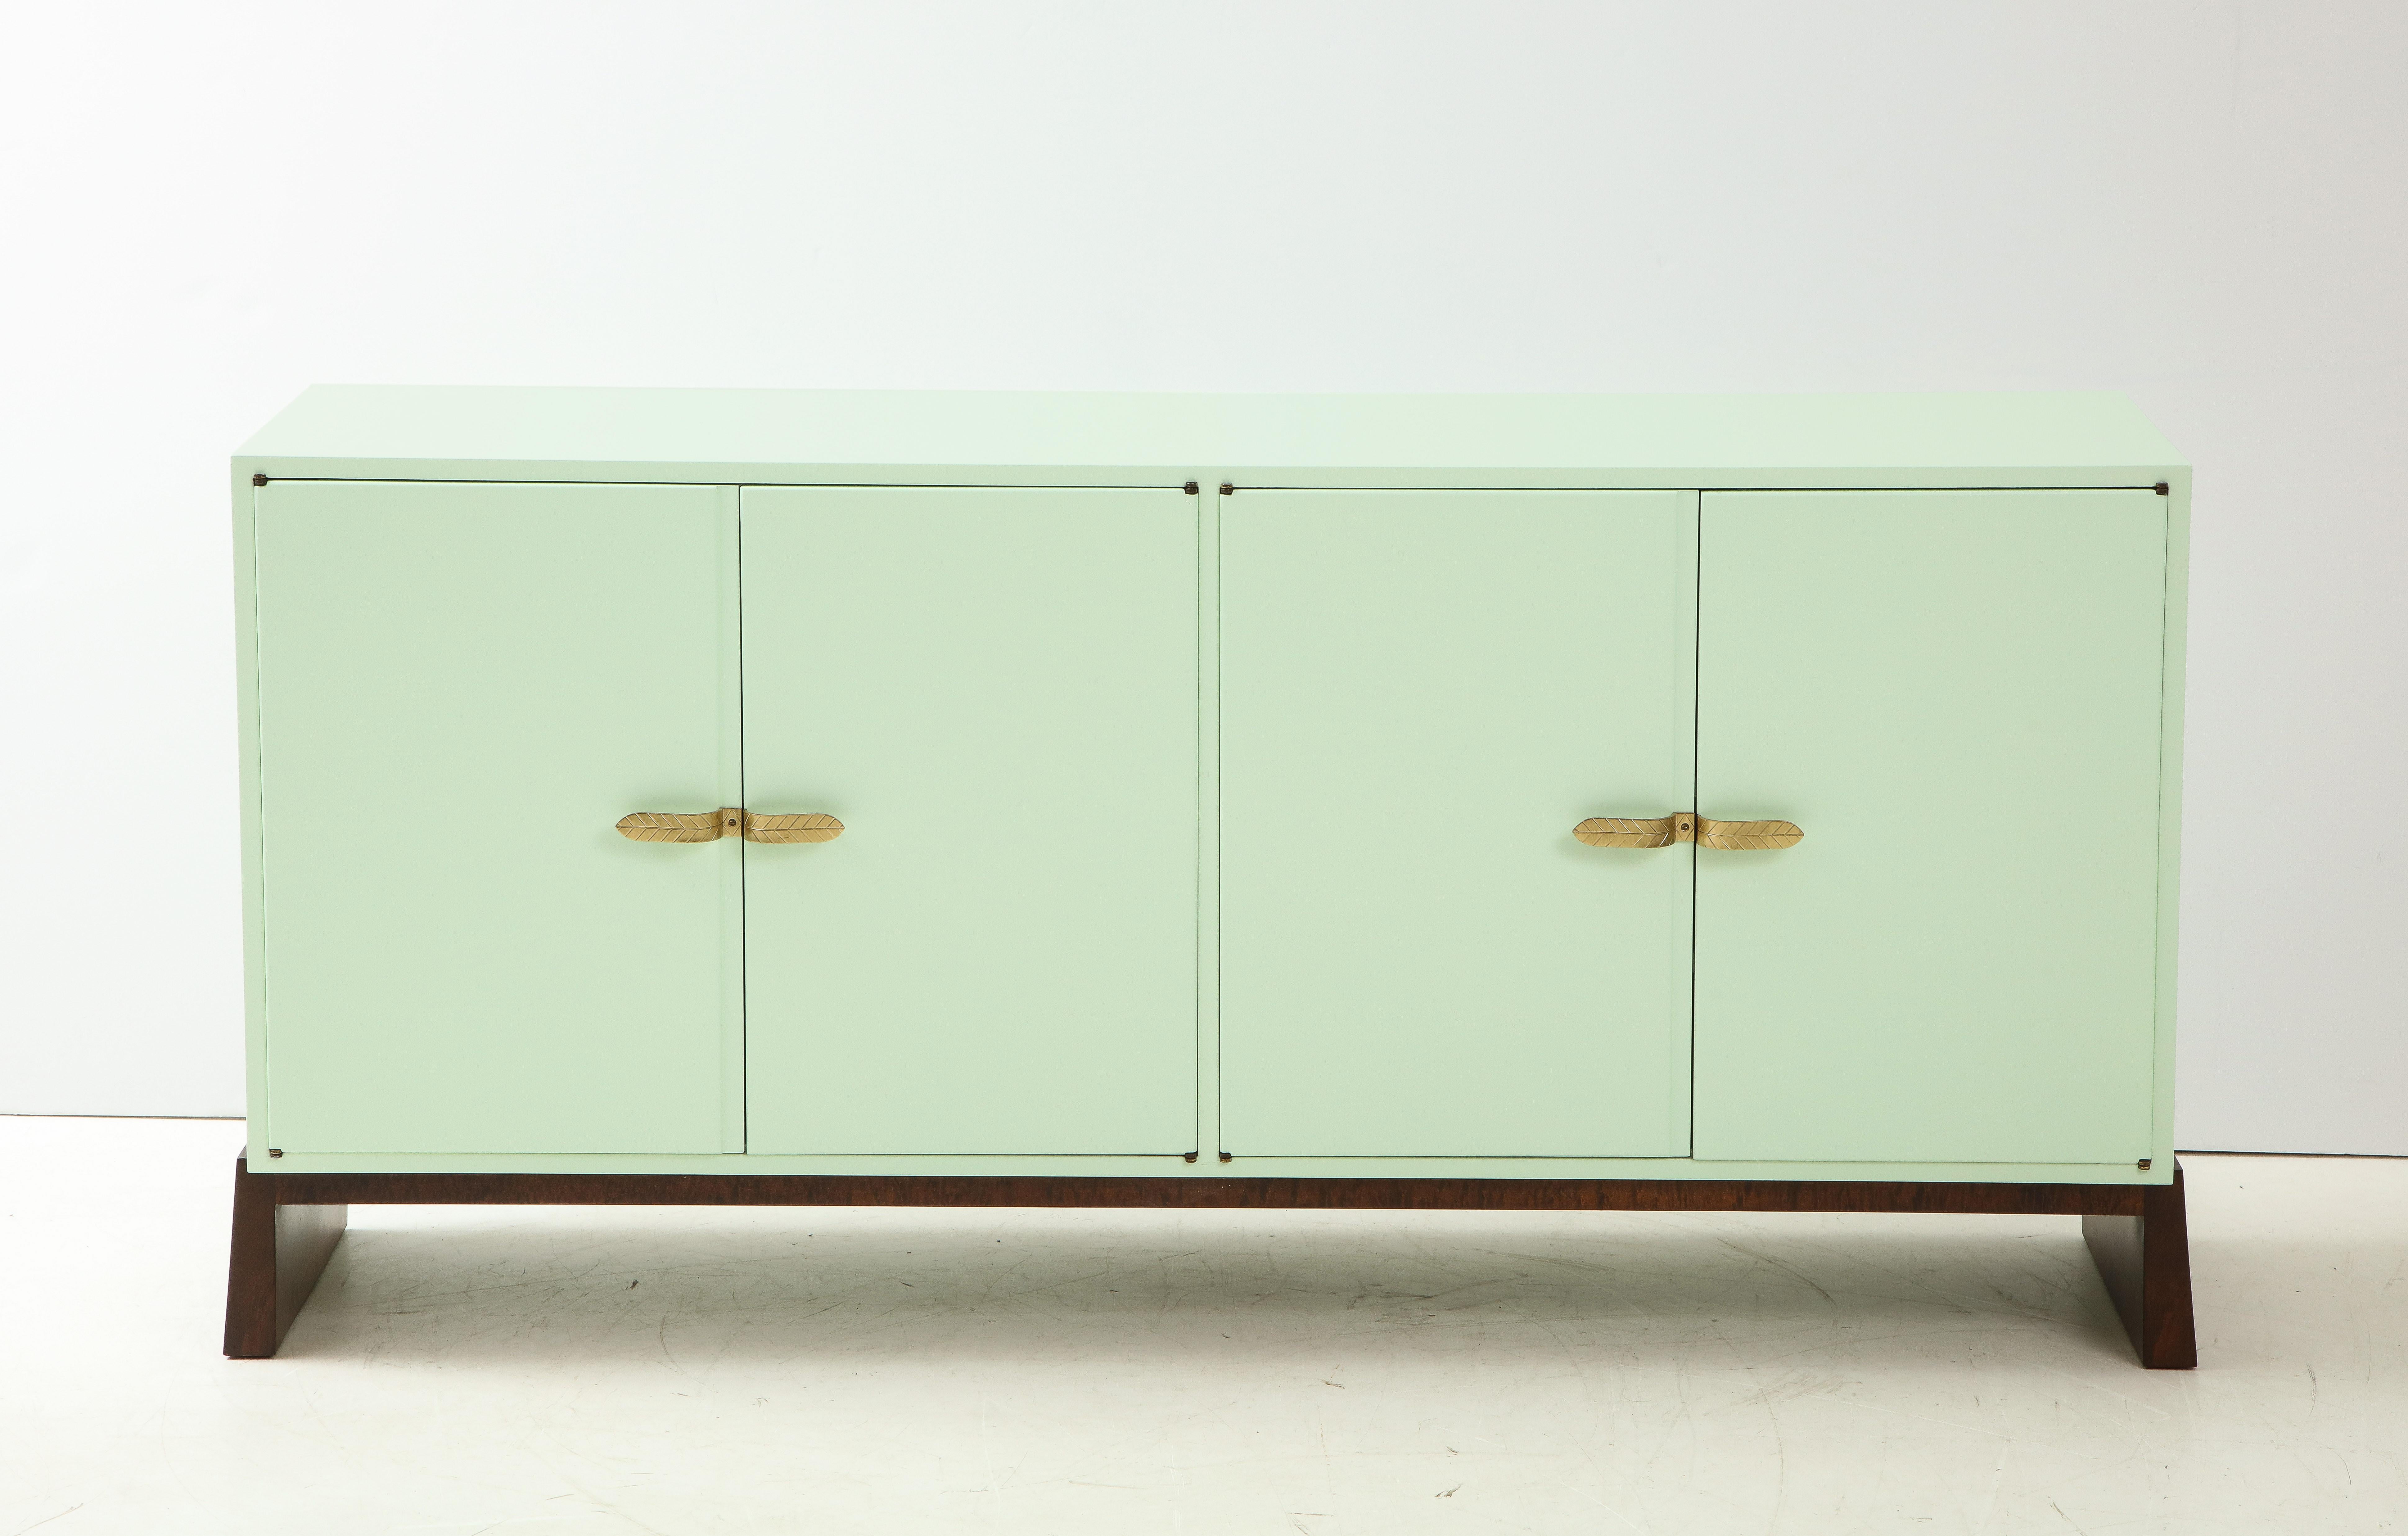 American midcentury sideboard featuring a seductive matte finished Pistachio color lacquer with stylized brass leaf handles, interior finished in a white matte lacquer with shelves. Cabinet rests on splayed walnut base. Stamped Parzinger Originals.